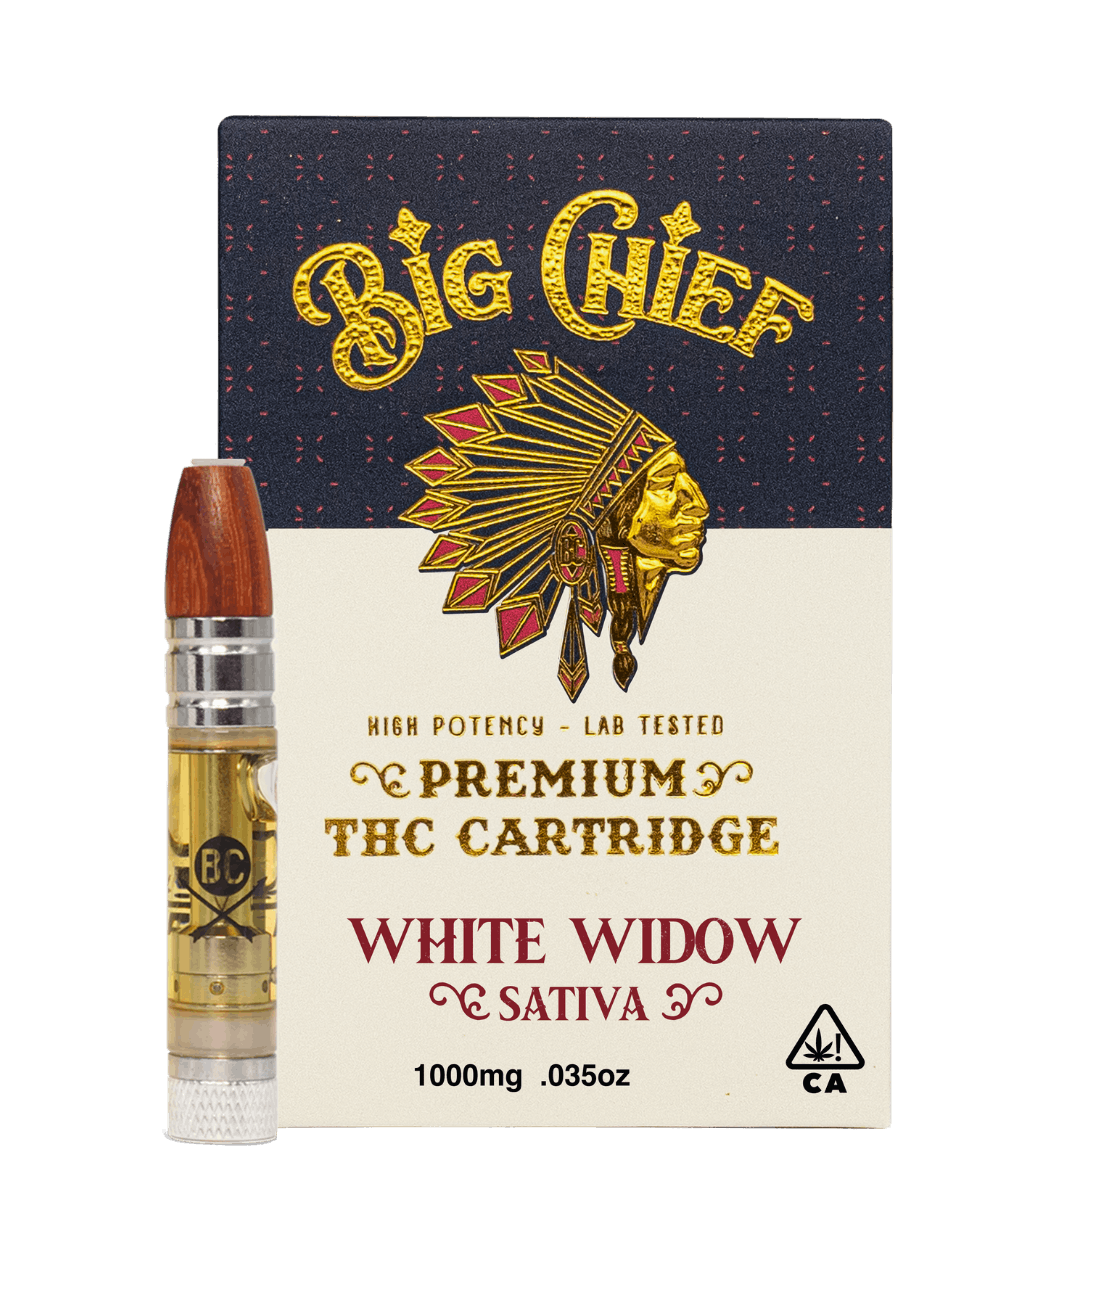 Big Chief THC Carts Quality Carts For All